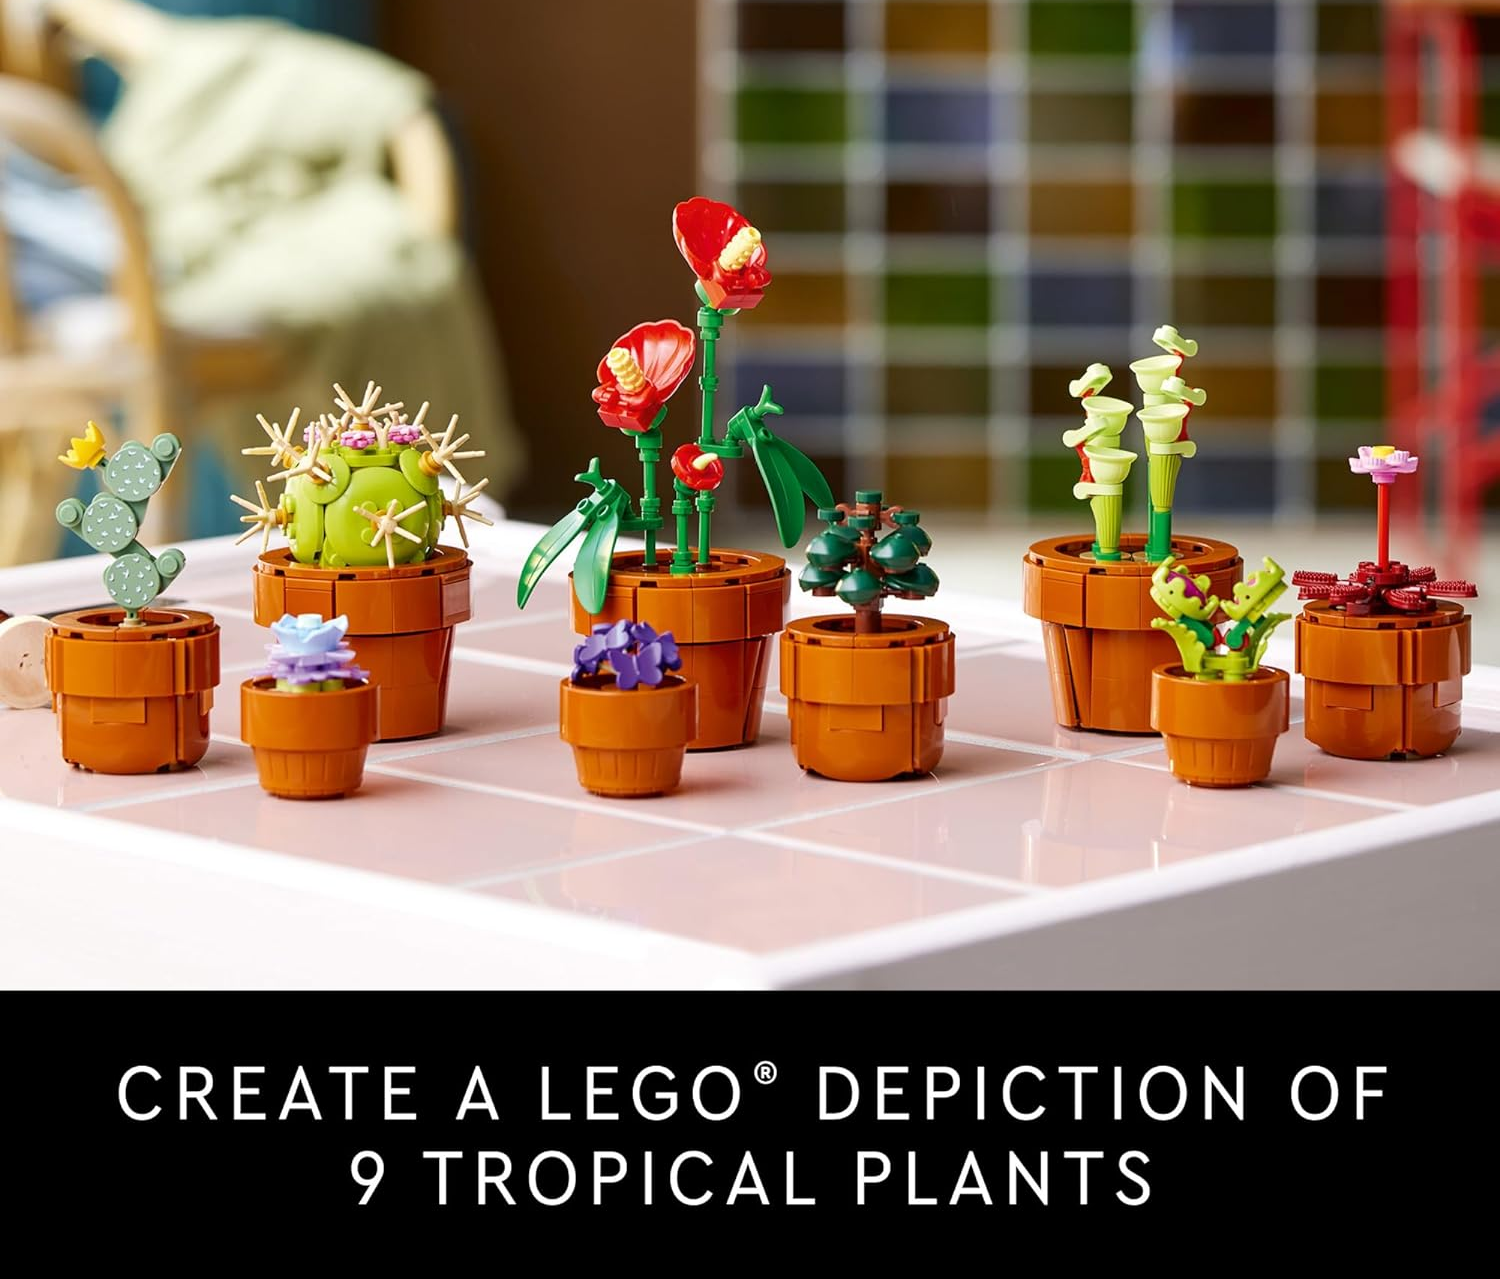 The plants, which are housed in little lego constructed pots